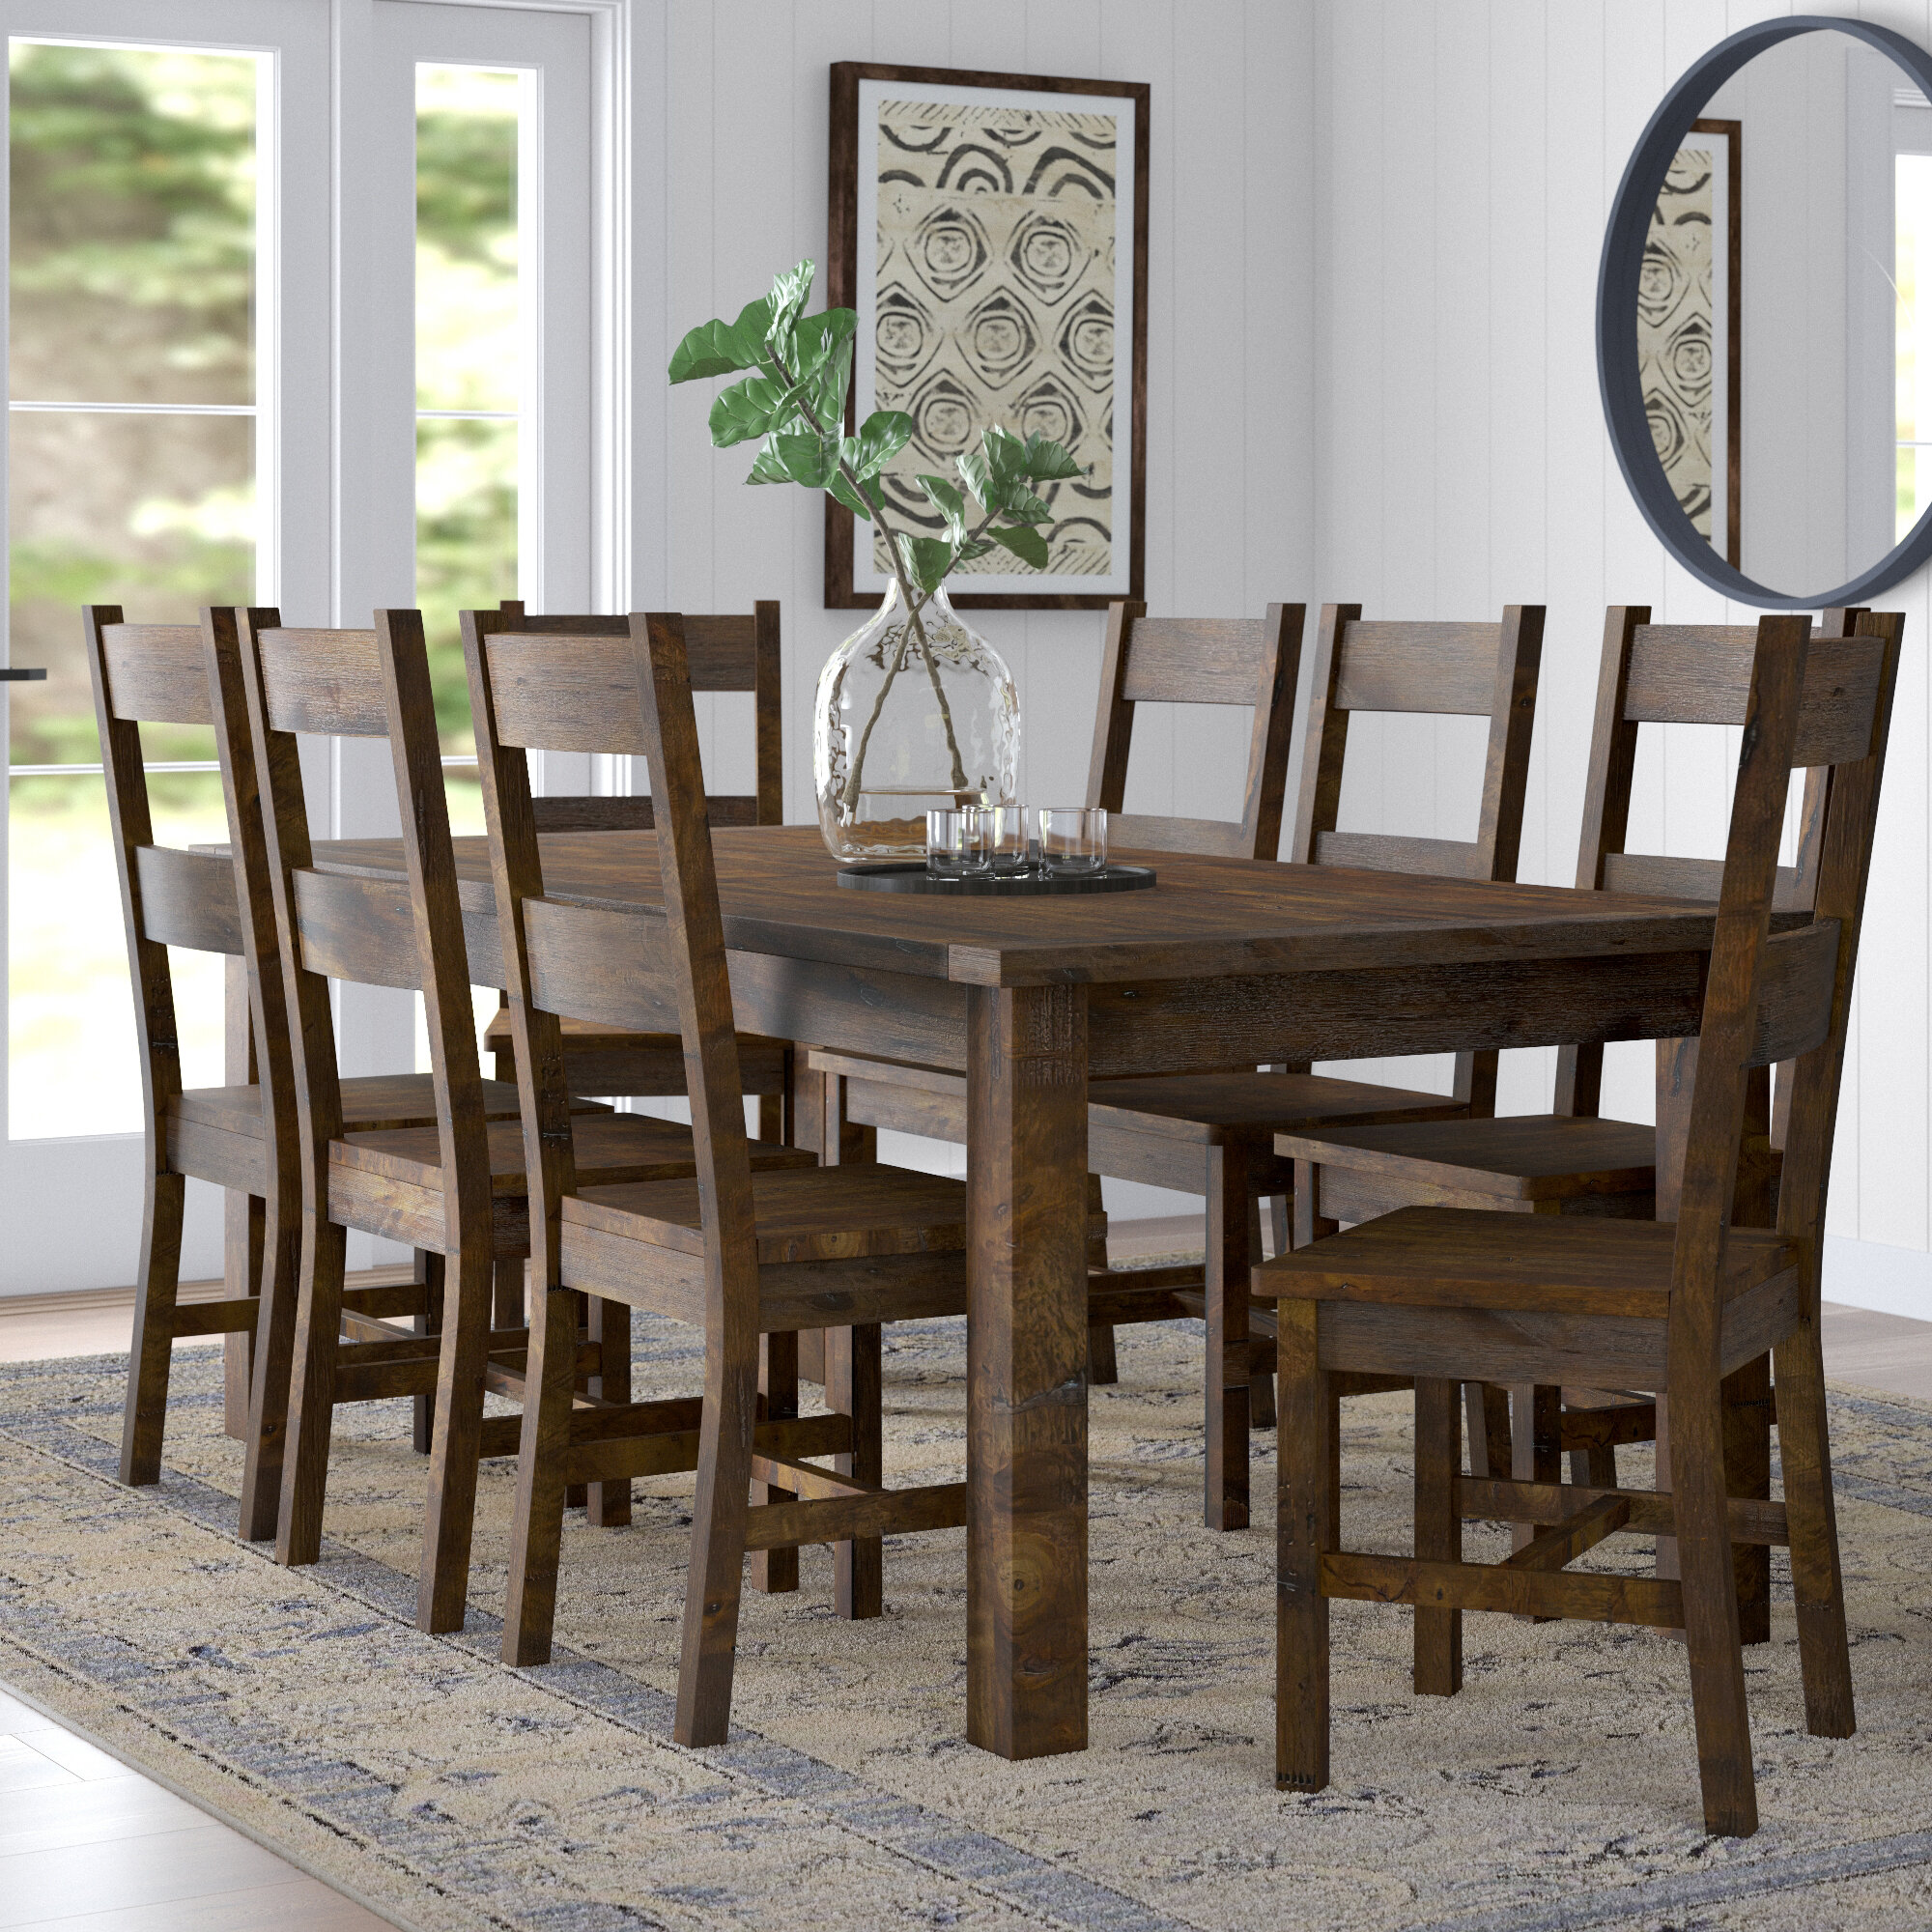 Rustic Dining Table Antique Grey Wood Kitchen Rectangle Seats 4-6 Distressed New 